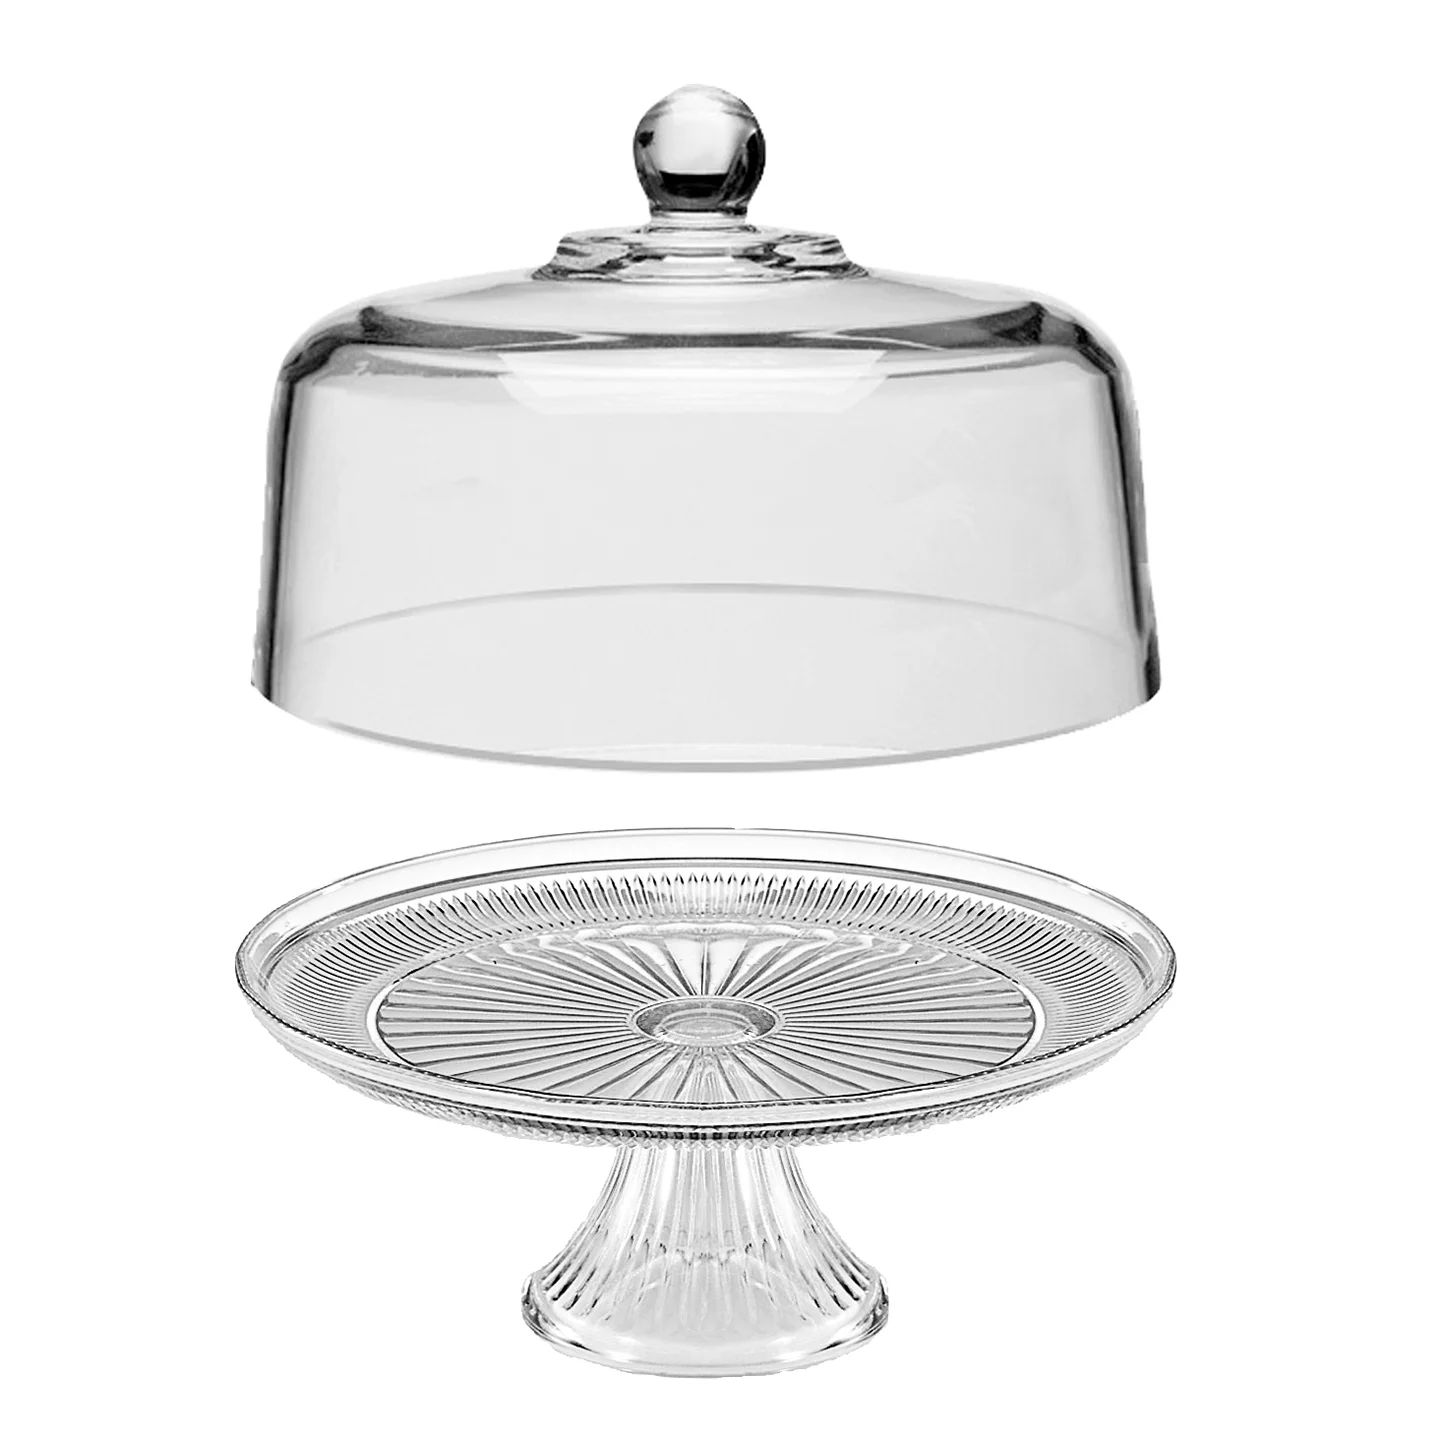 Mainstays Clear Glass Cake Set, 13-inch Cake Plate on Stand and 11.5-inch Dome. | Walmart (US)